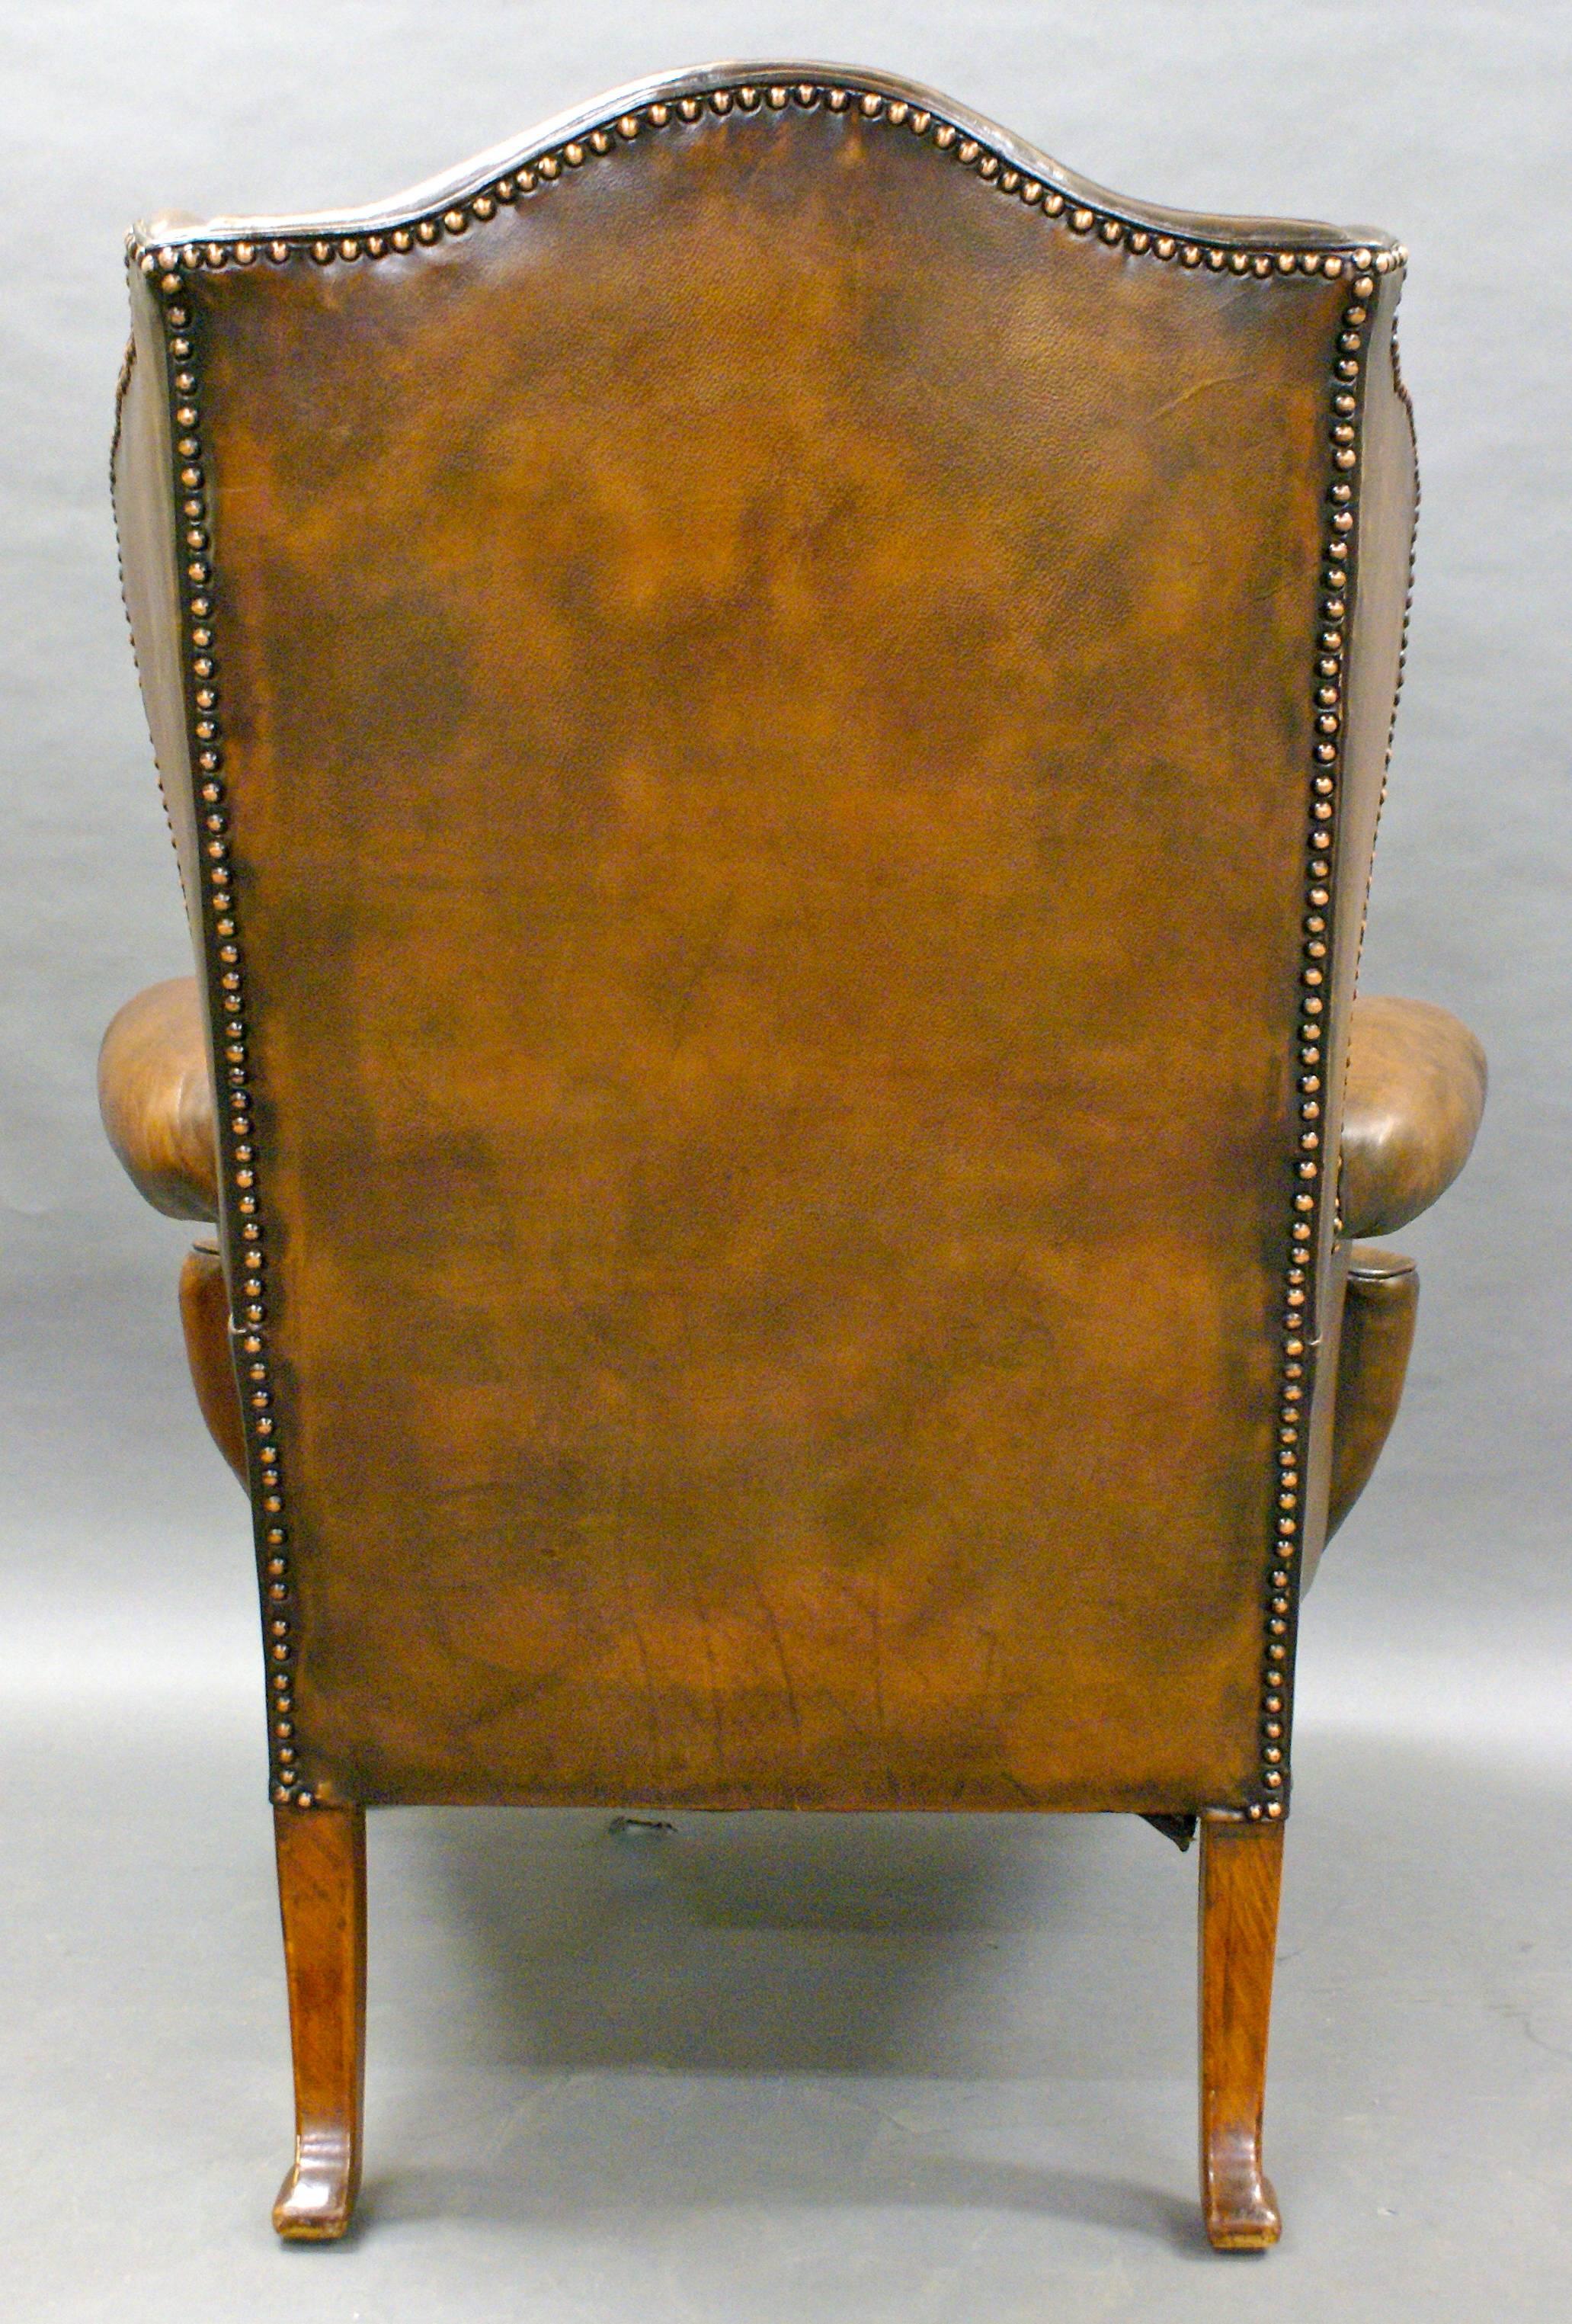 20th Century Georgian Revival Leather Upholstered Wingback Chair